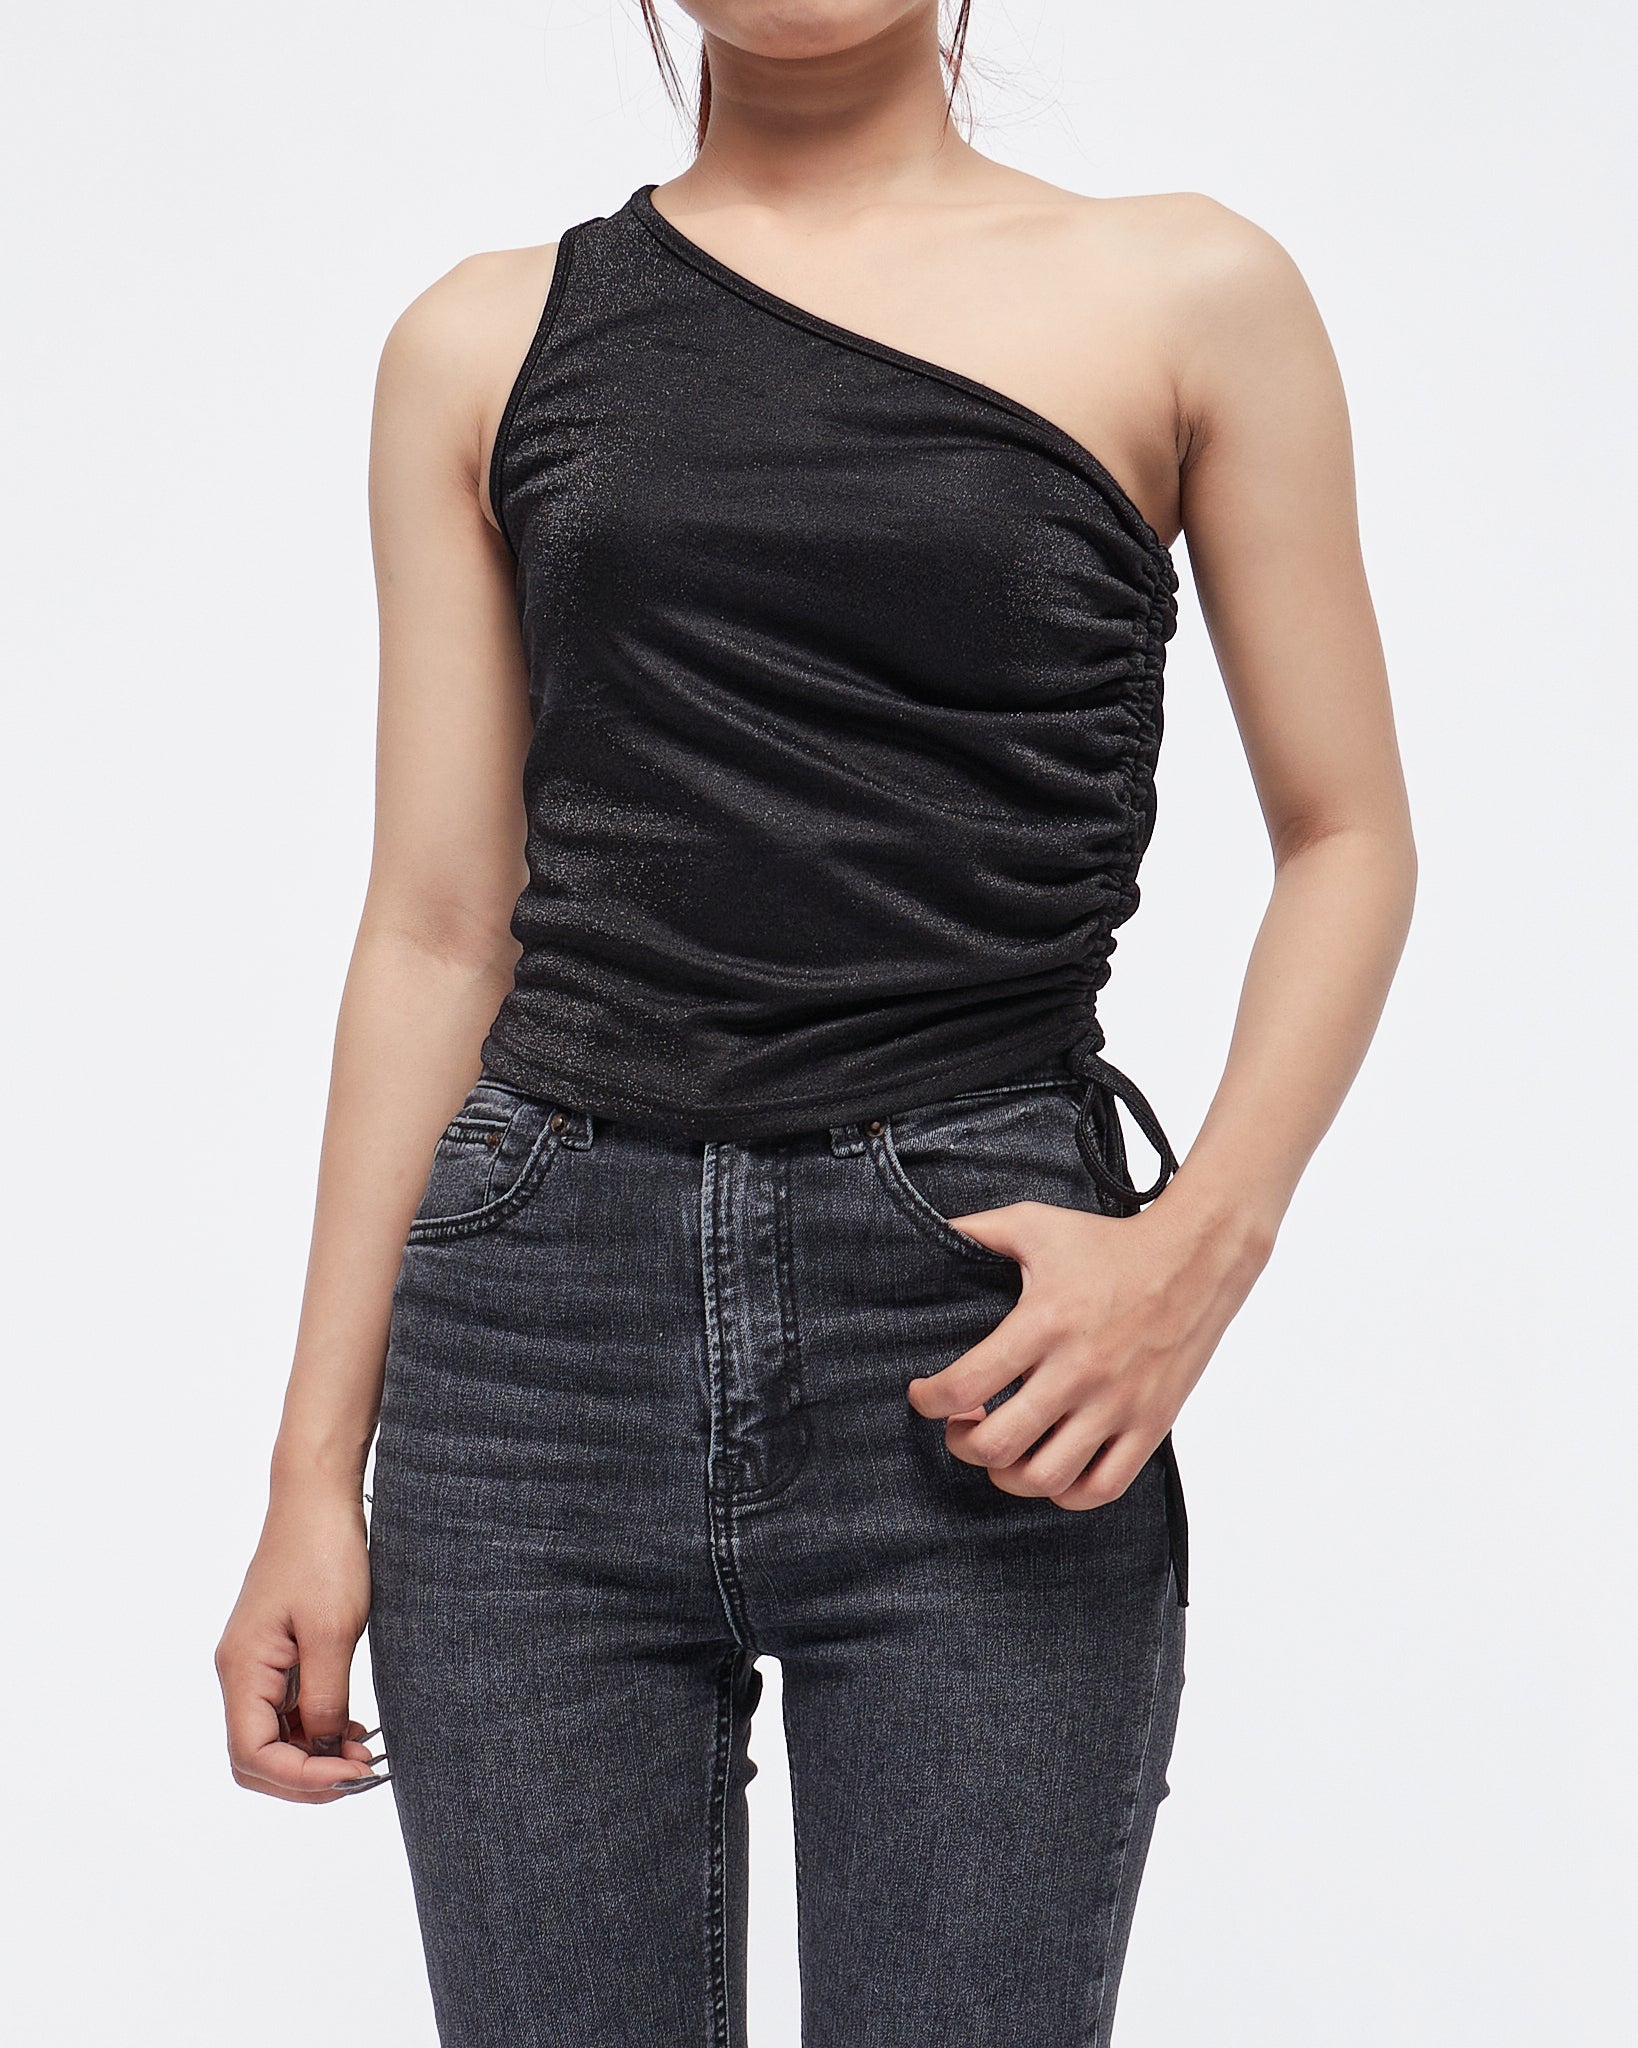 MOI OUTFIT-One Shoulder Lady Crop Top 17.50